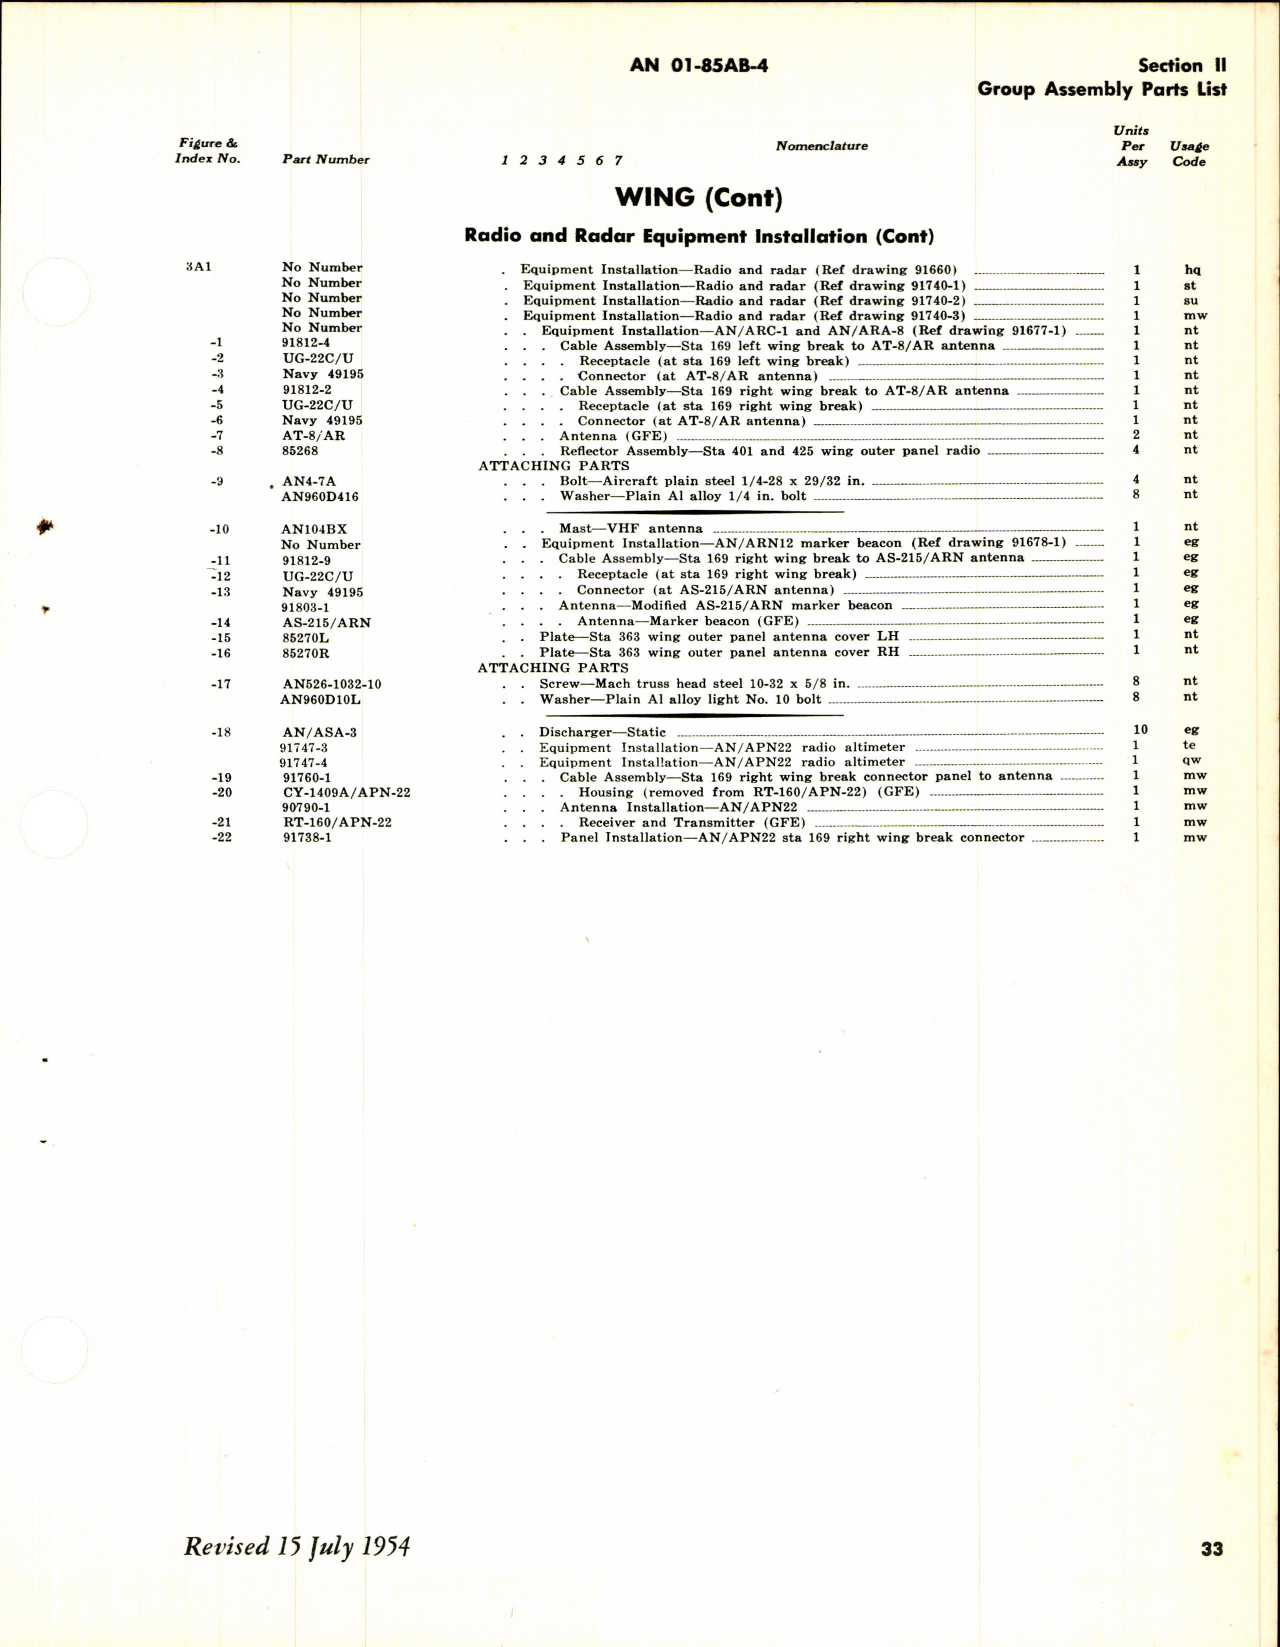 Sample page 49 from AirCorps Library document: Parts Catalog for SA-16A-GR, UF-1, and UF-1T Aircraft